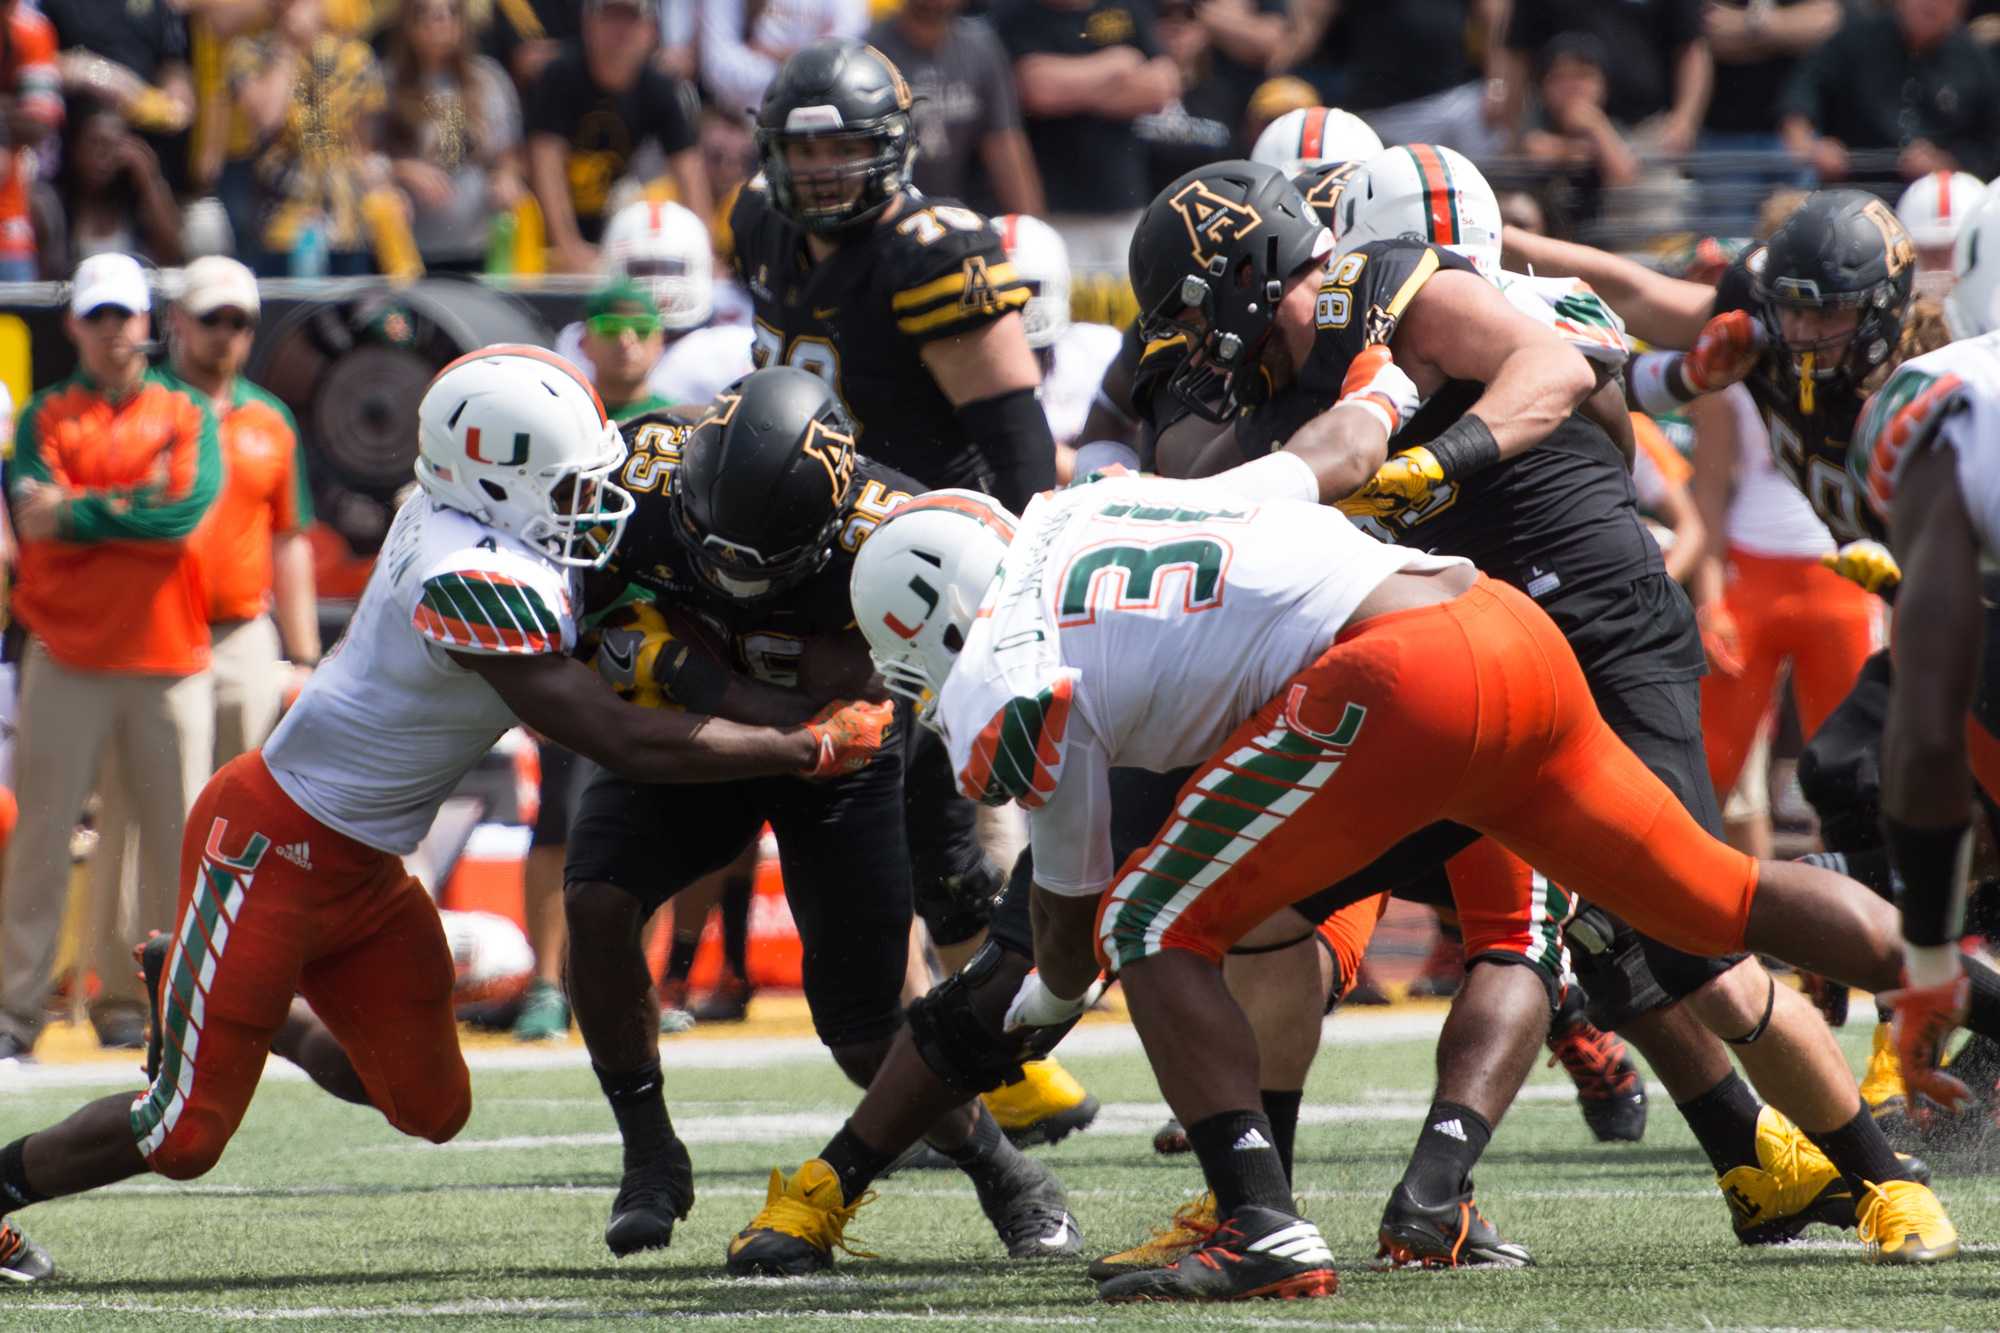 Running+back+Jalin+Moore+attempts+to+break+through+the+Hurricanes+going+for+a+tackle.+Photo+by+Dallas+Linger%2C+Photo+Editor